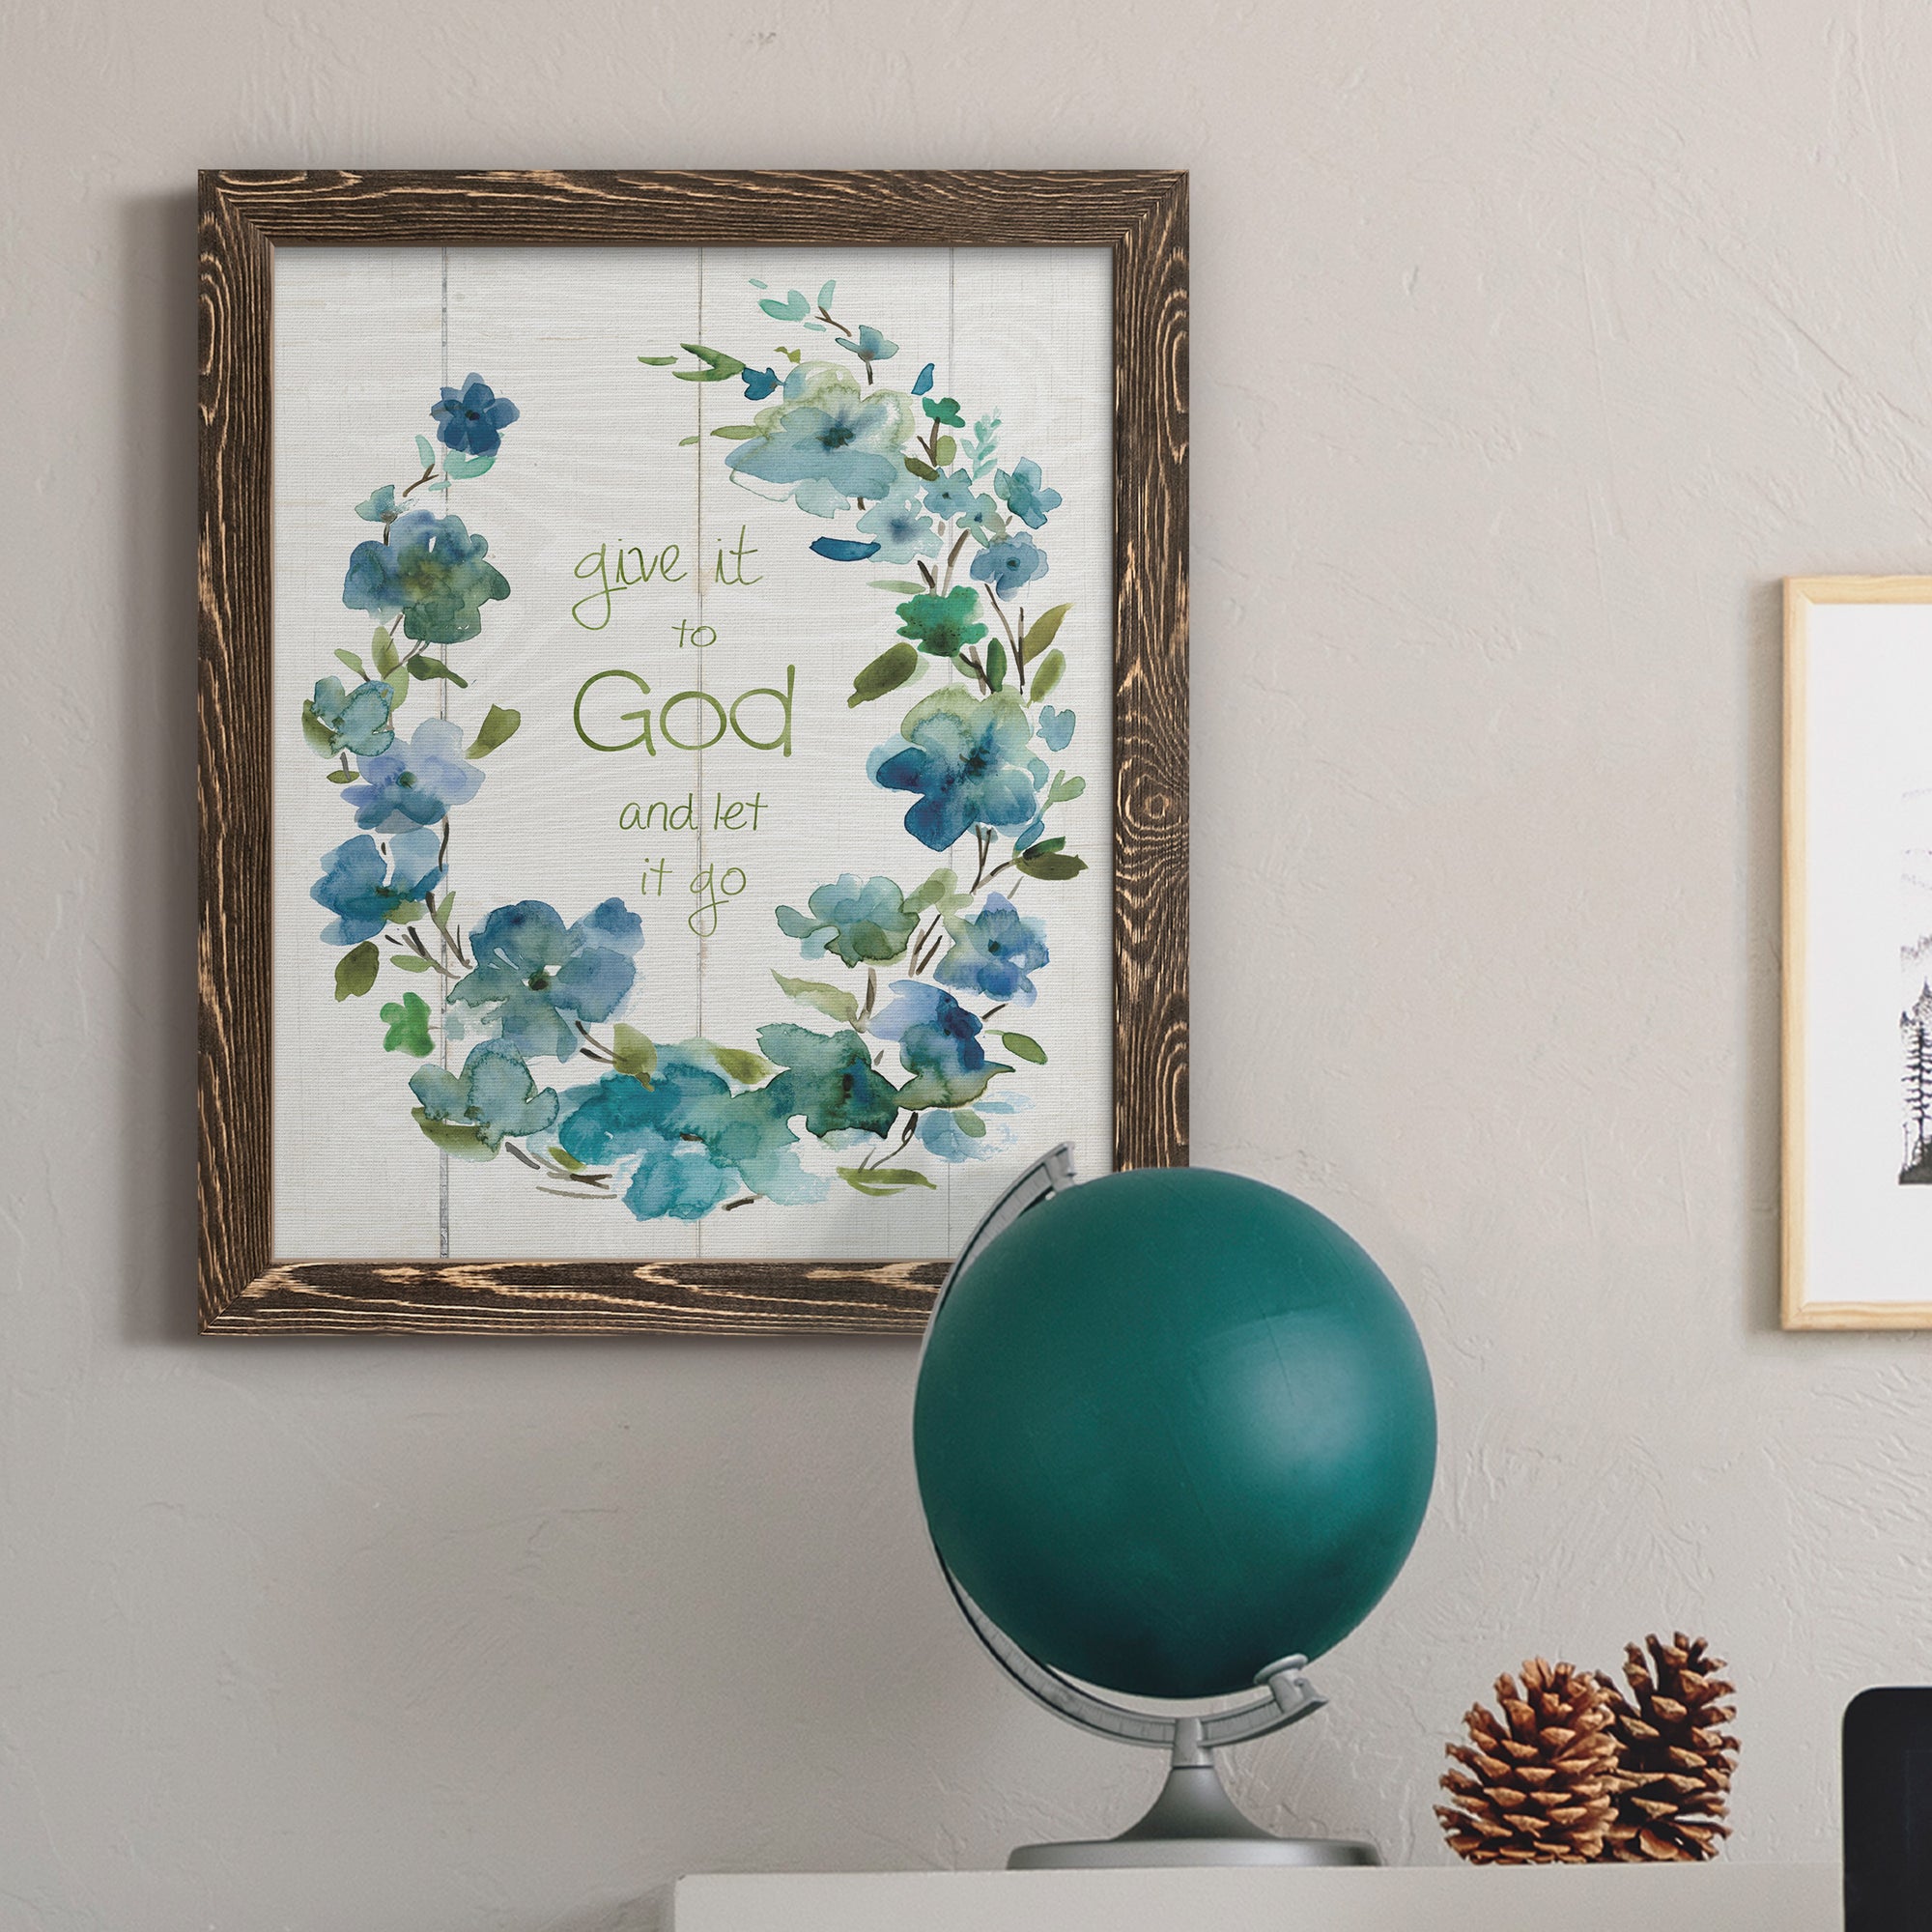 Give It To God - Premium Canvas Framed in Barnwood - Ready to Hang